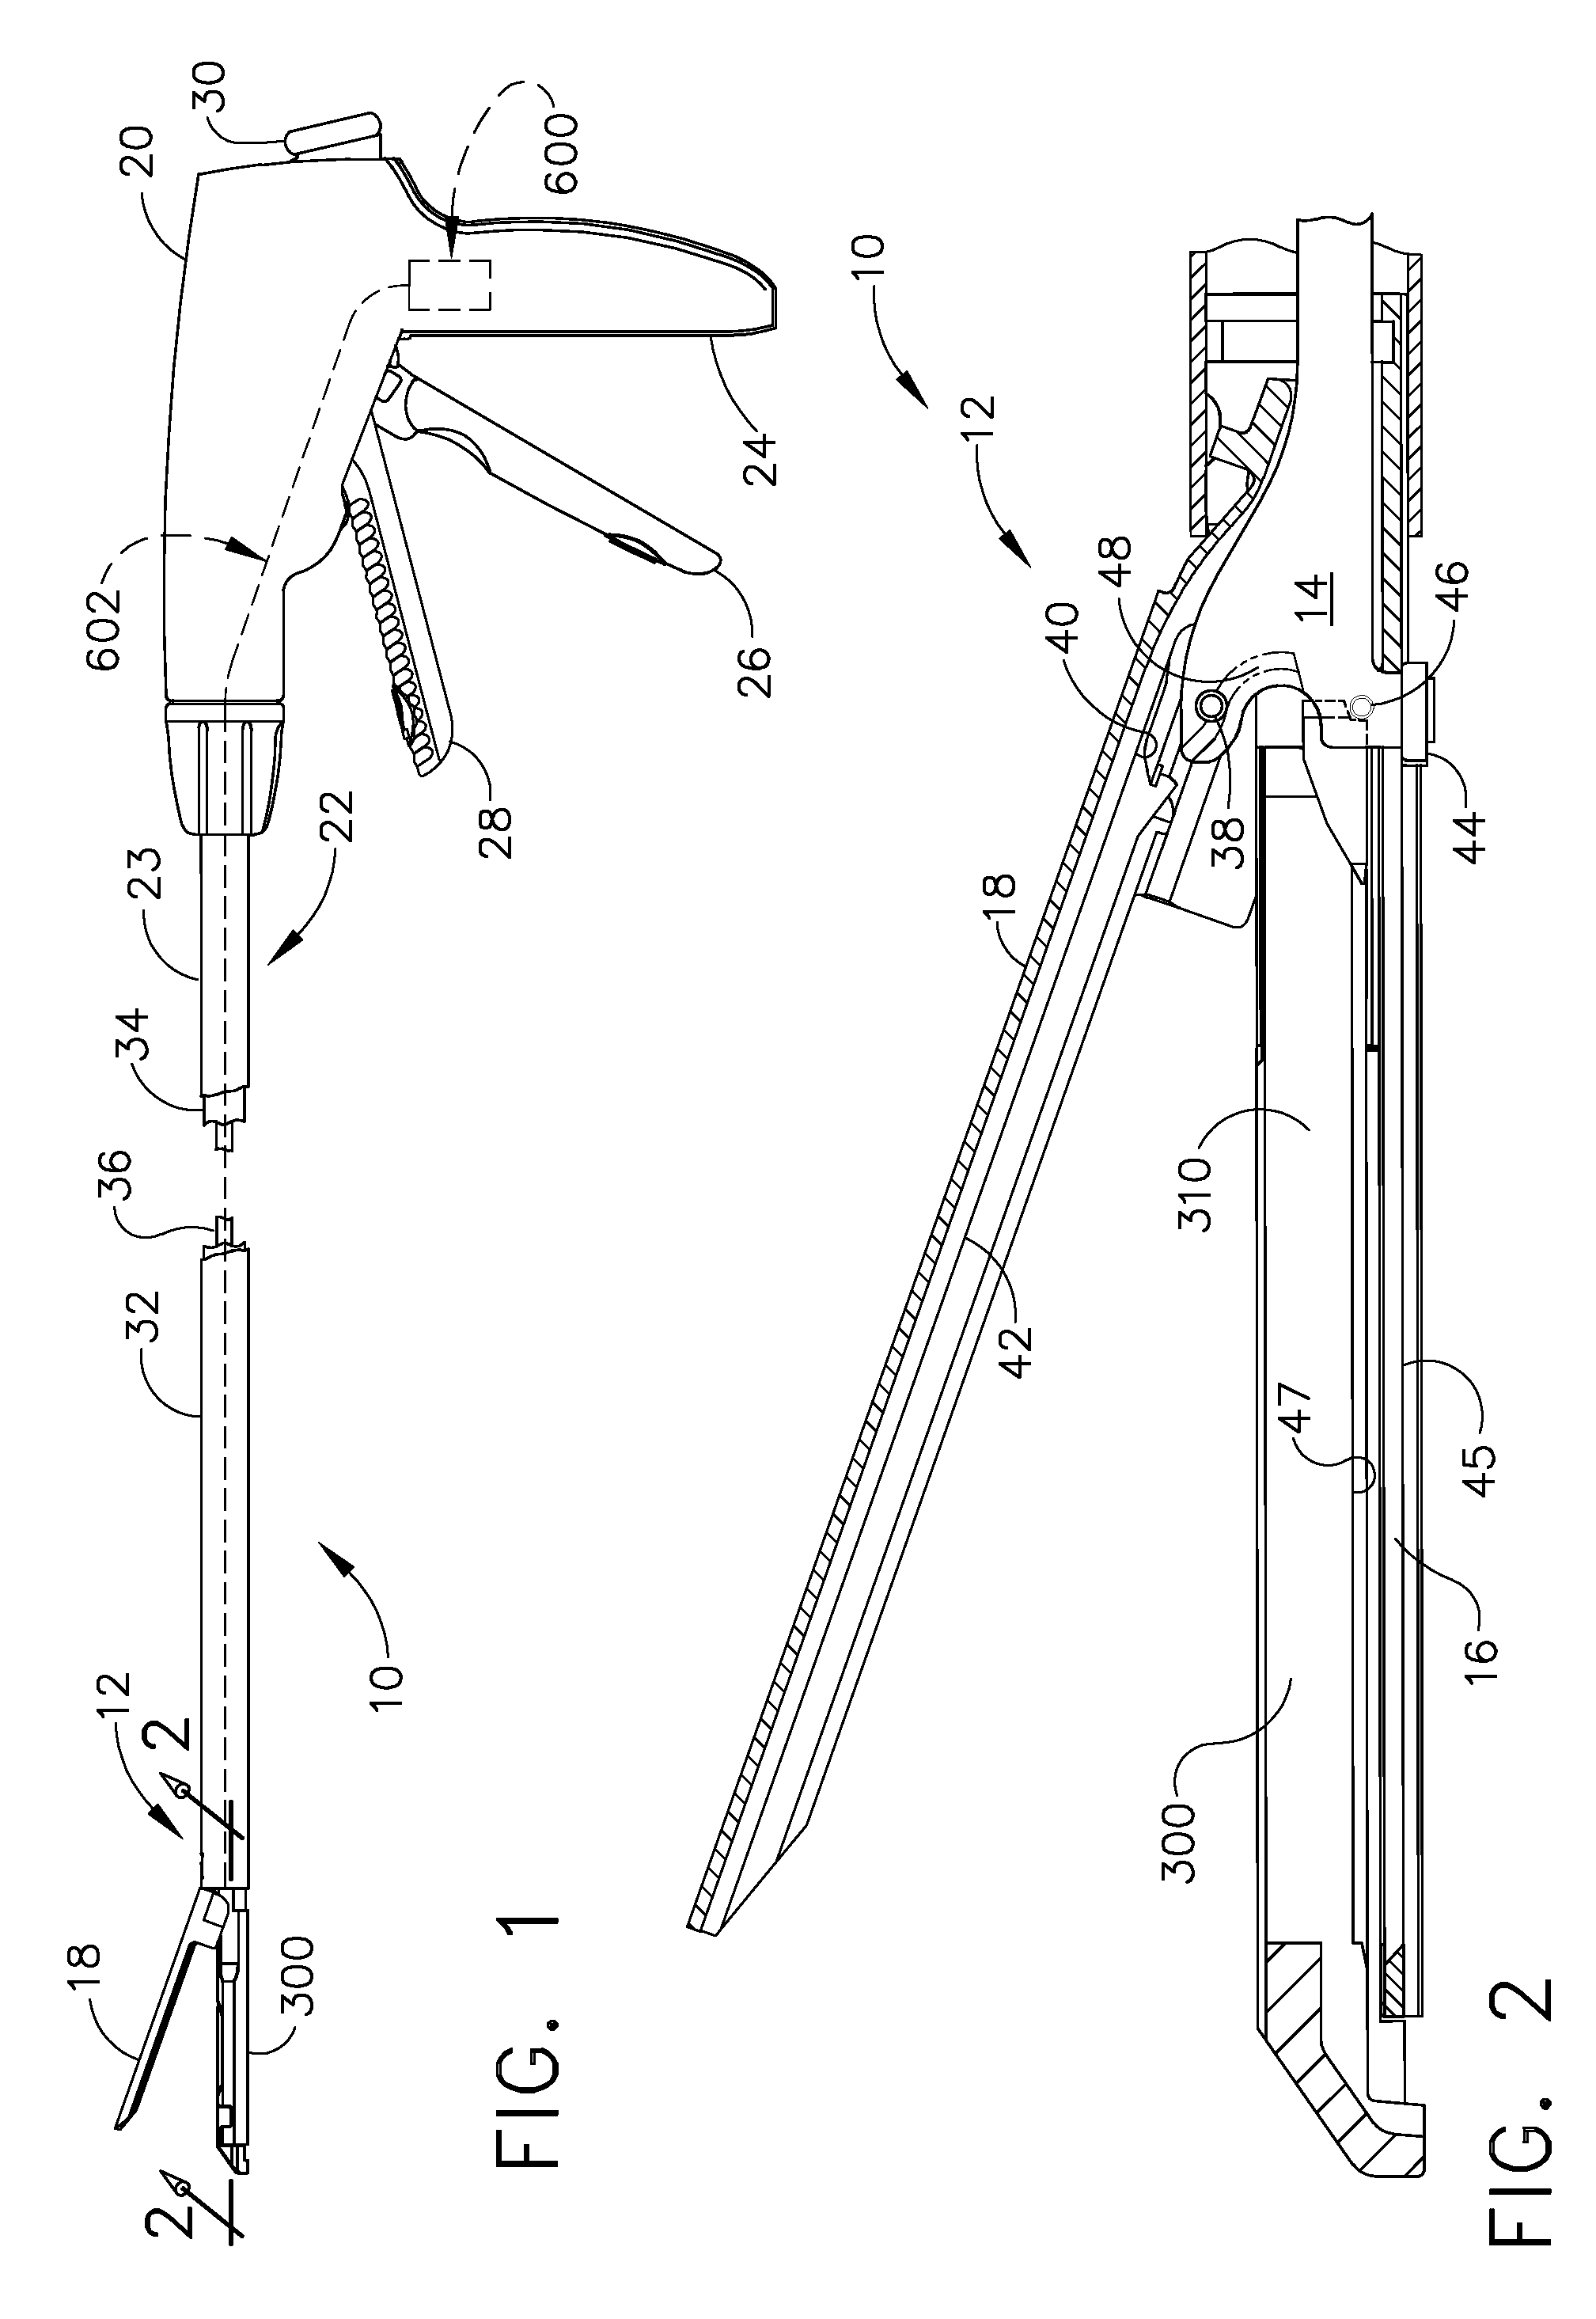 End effector for use with a surgical cutting and stapling instrument